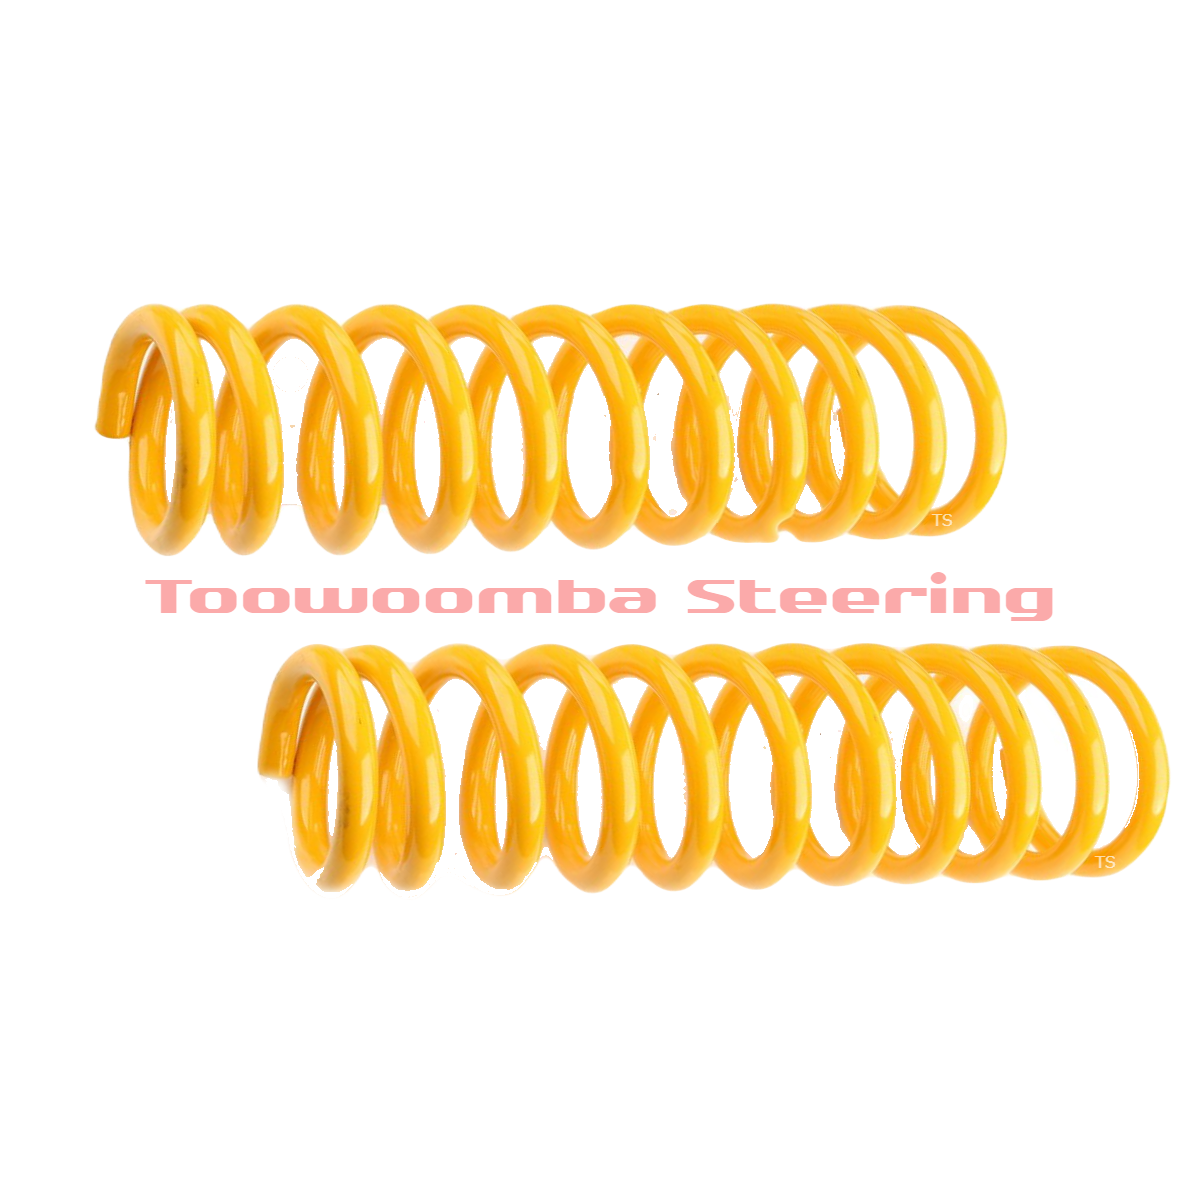 Rear Raised King Coil Springs - Ideal for - Holden H Series HQ; HJ; HX 6CYL & 8 CYL- SEDAN 71-77, H Series HZ RTS 6CYL & 8CYL- SEDAN 78-79 - (KHRS-05)